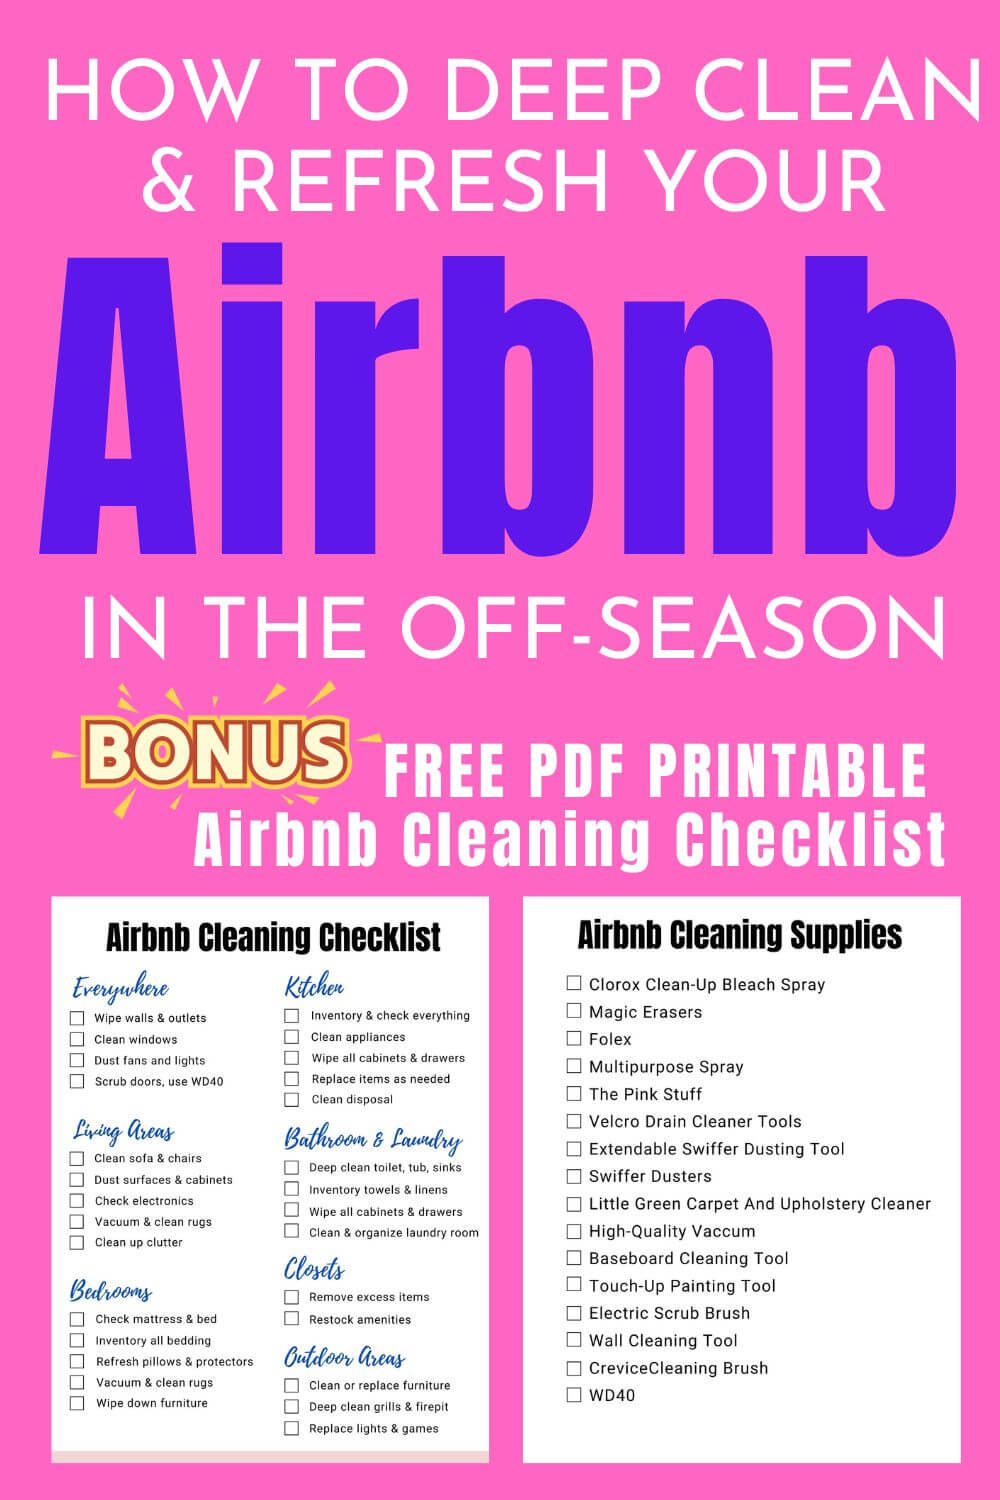 Airbnb Cleaning Checklist PDF FREE Printable